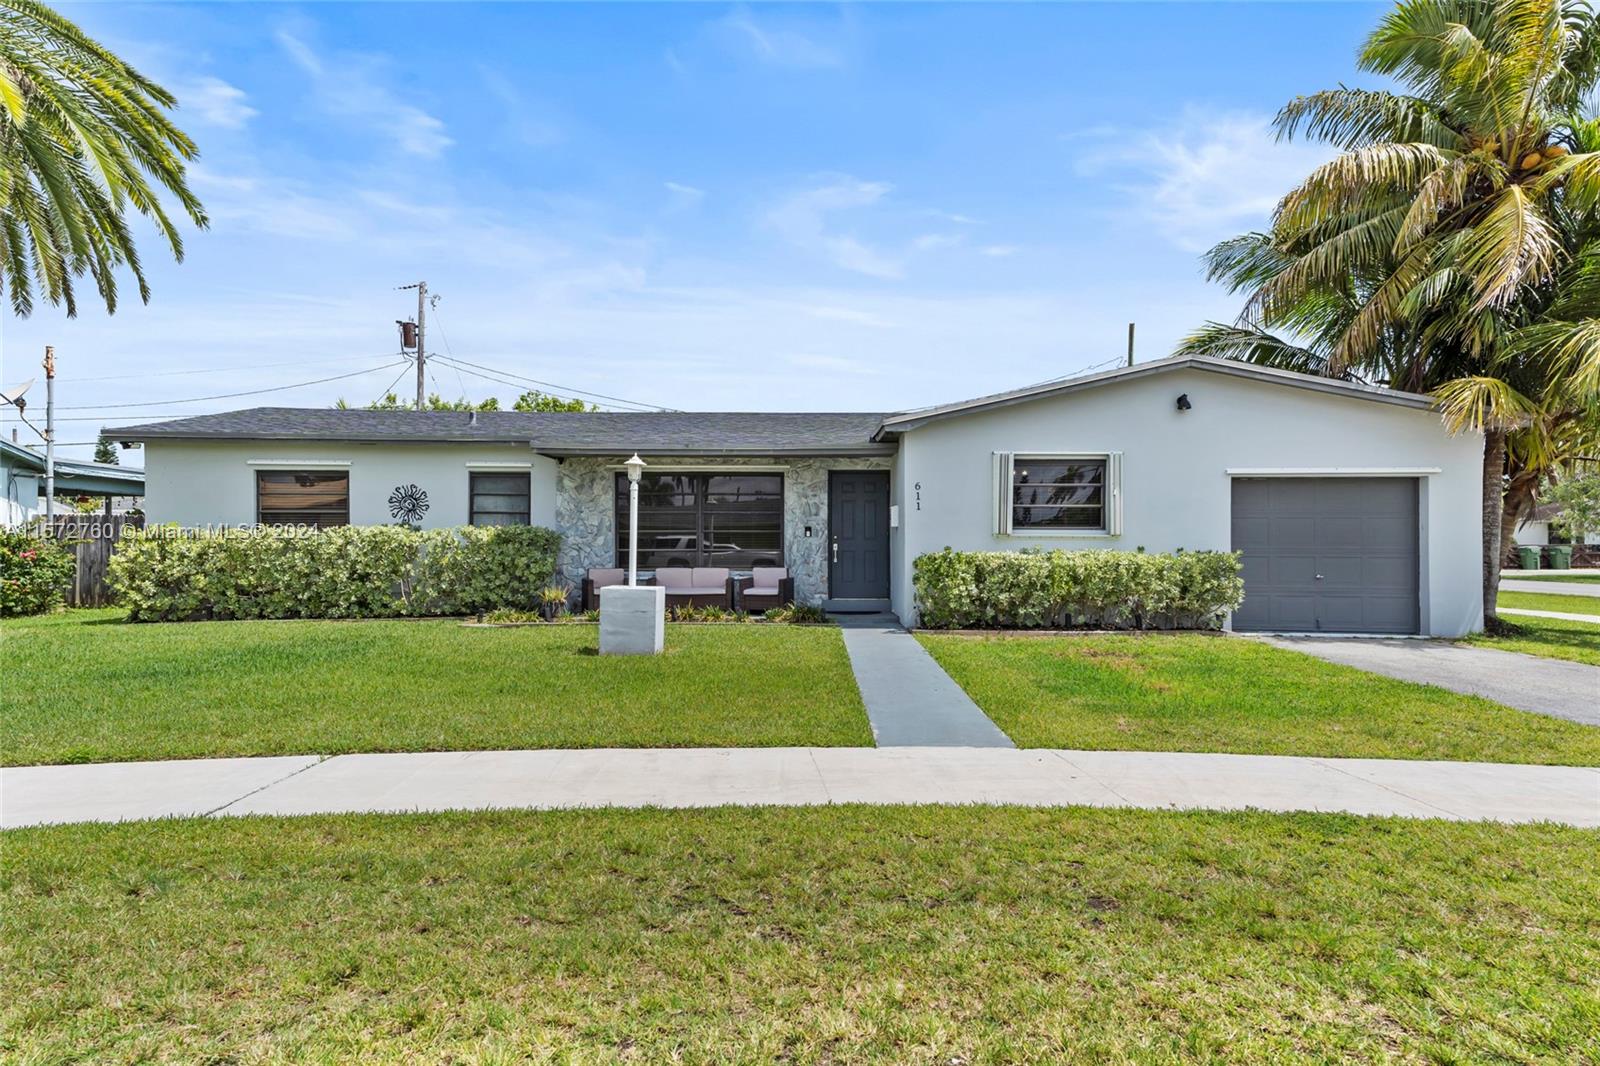 Welcome to this charming, remodeled home on a large corner lot. This home offers an open concept with plenty of natural lighting in the living & dining room area. Kitchen has a moving island to accommodate guests, plenty of space to cook, and an oversized refrigerator. Each room has custom closets. There's also a single-car garage and plenty of front and backyard space, as well as a covered terrace to sit down and enjoy family and/or entertain guests.